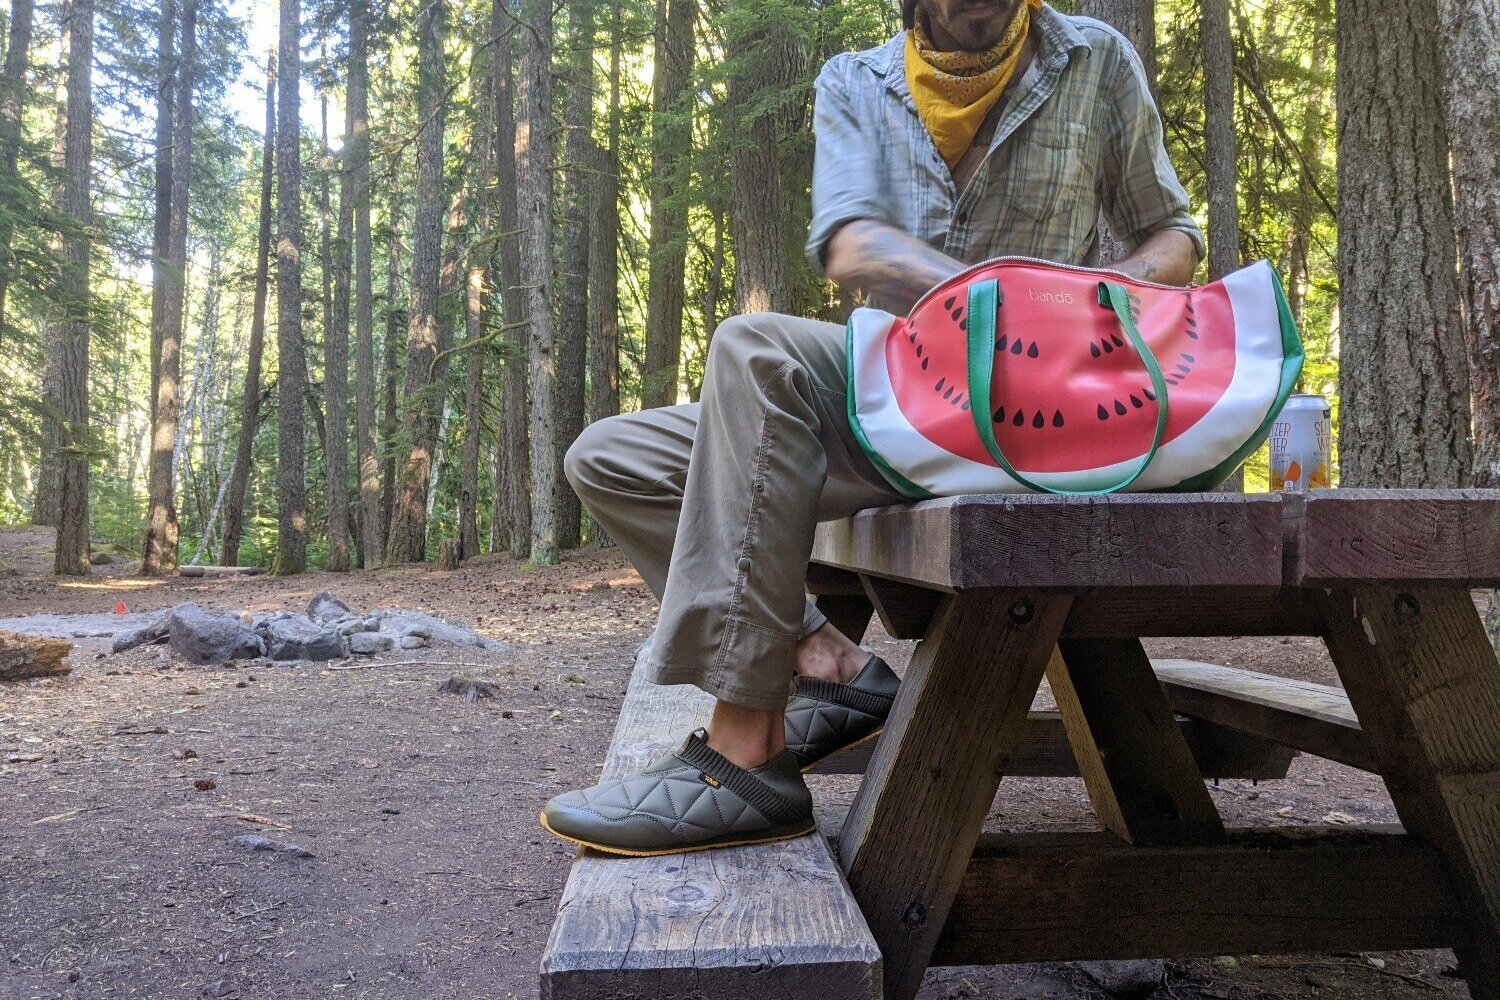 The Teva Ember Mocs are a little heavier than other camp shoes, so they work best for the frontcountry.